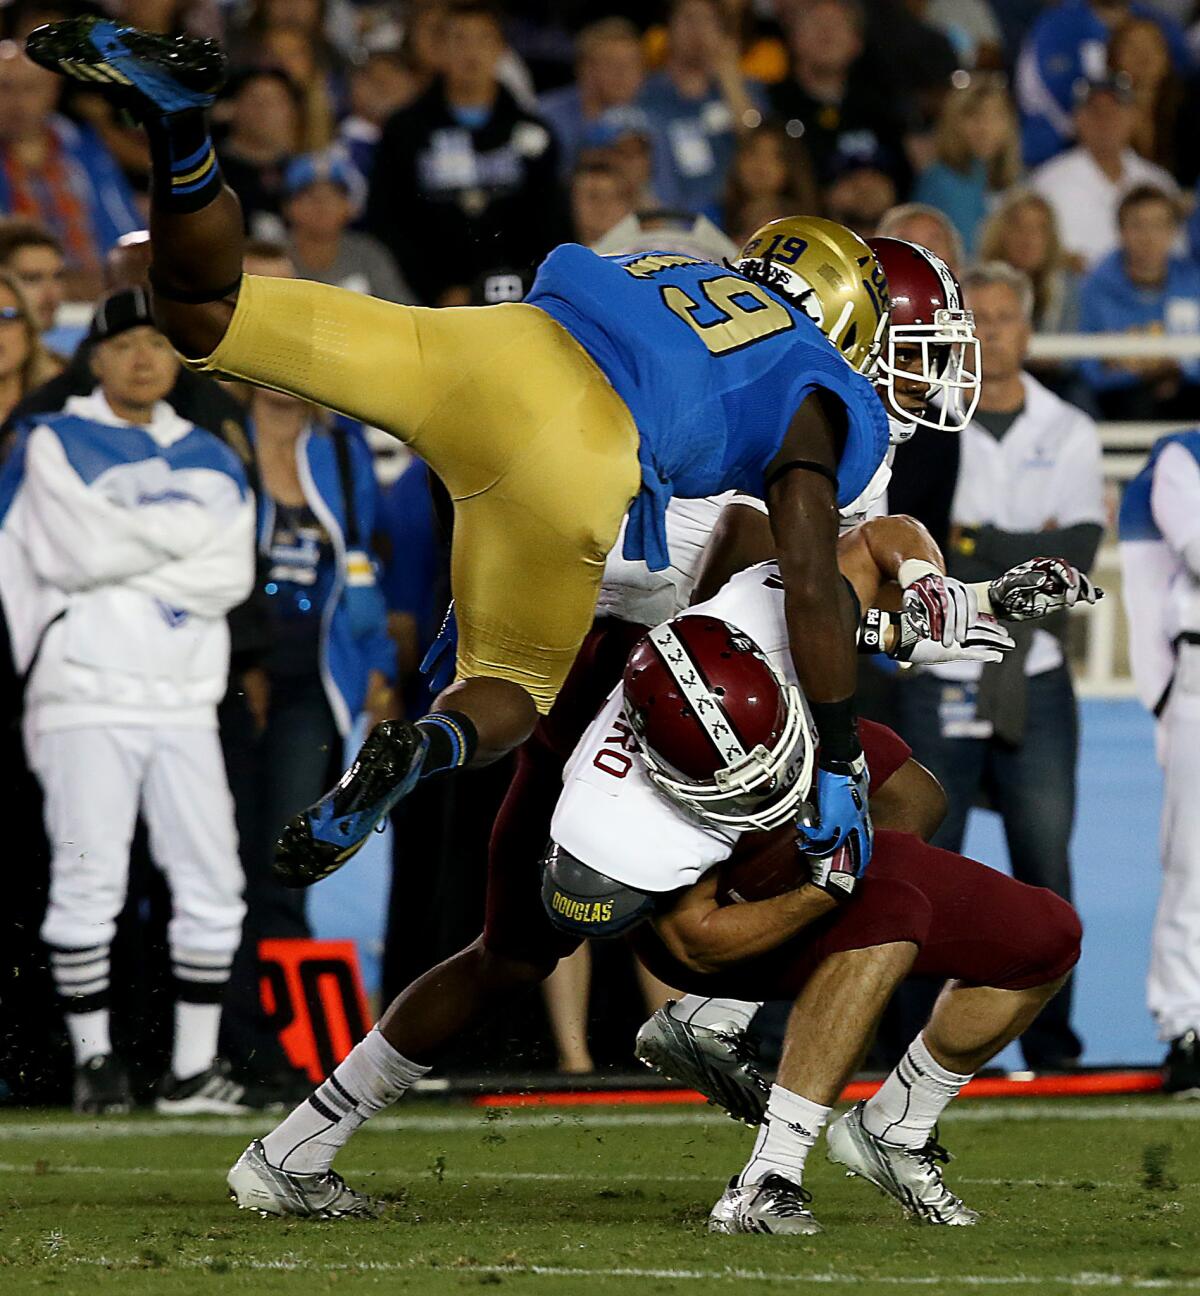 UCLA's Jayon Brown puts a flying hit on New Mexico State kick returner Adam Shapiro on Sept. 21, 2013.